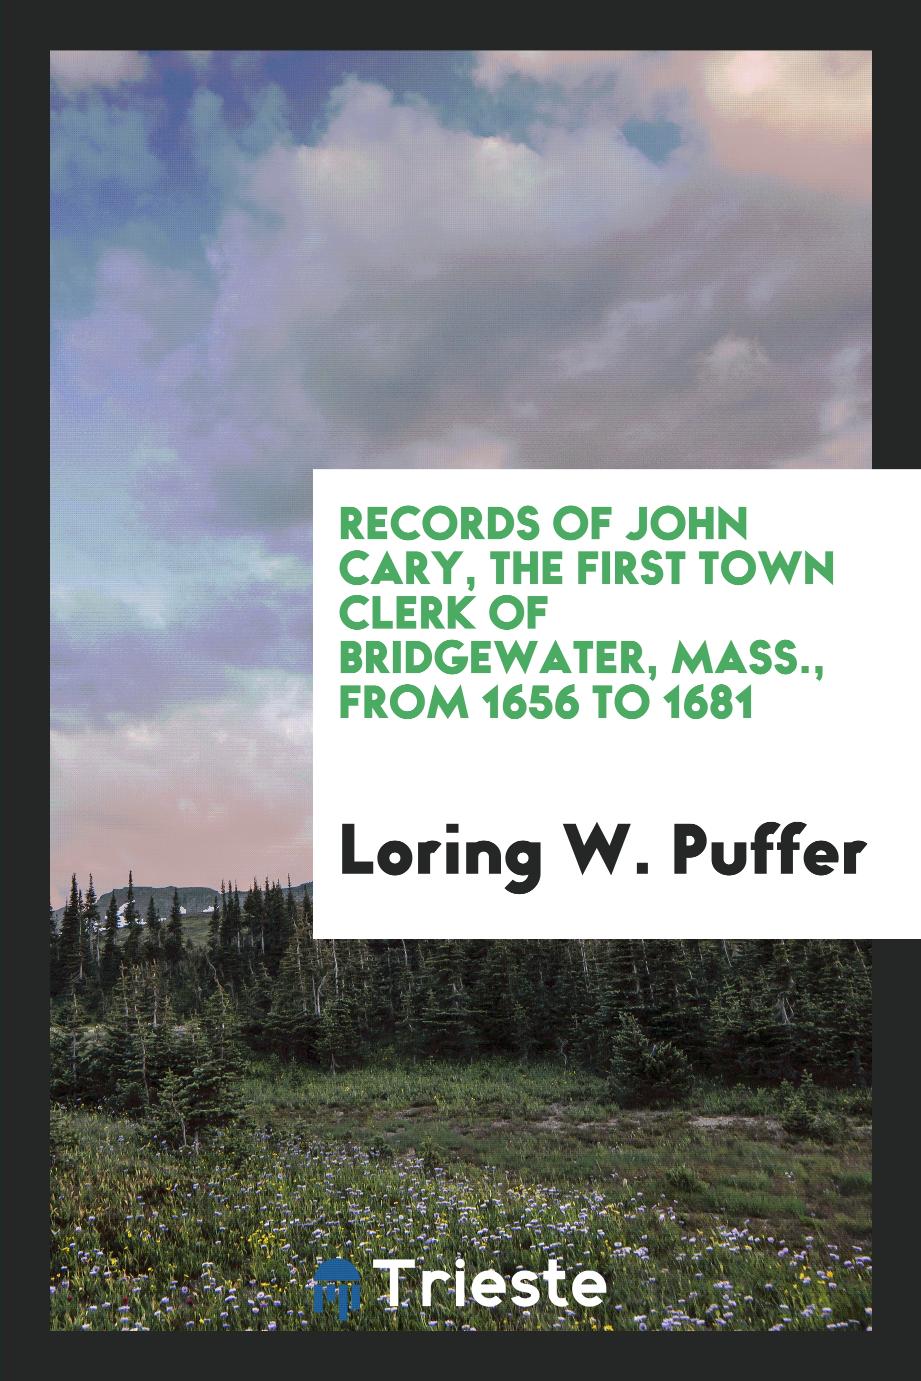 Records of John Cary, the first town clerk of Bridgewater, Mass., from 1656 to 1681